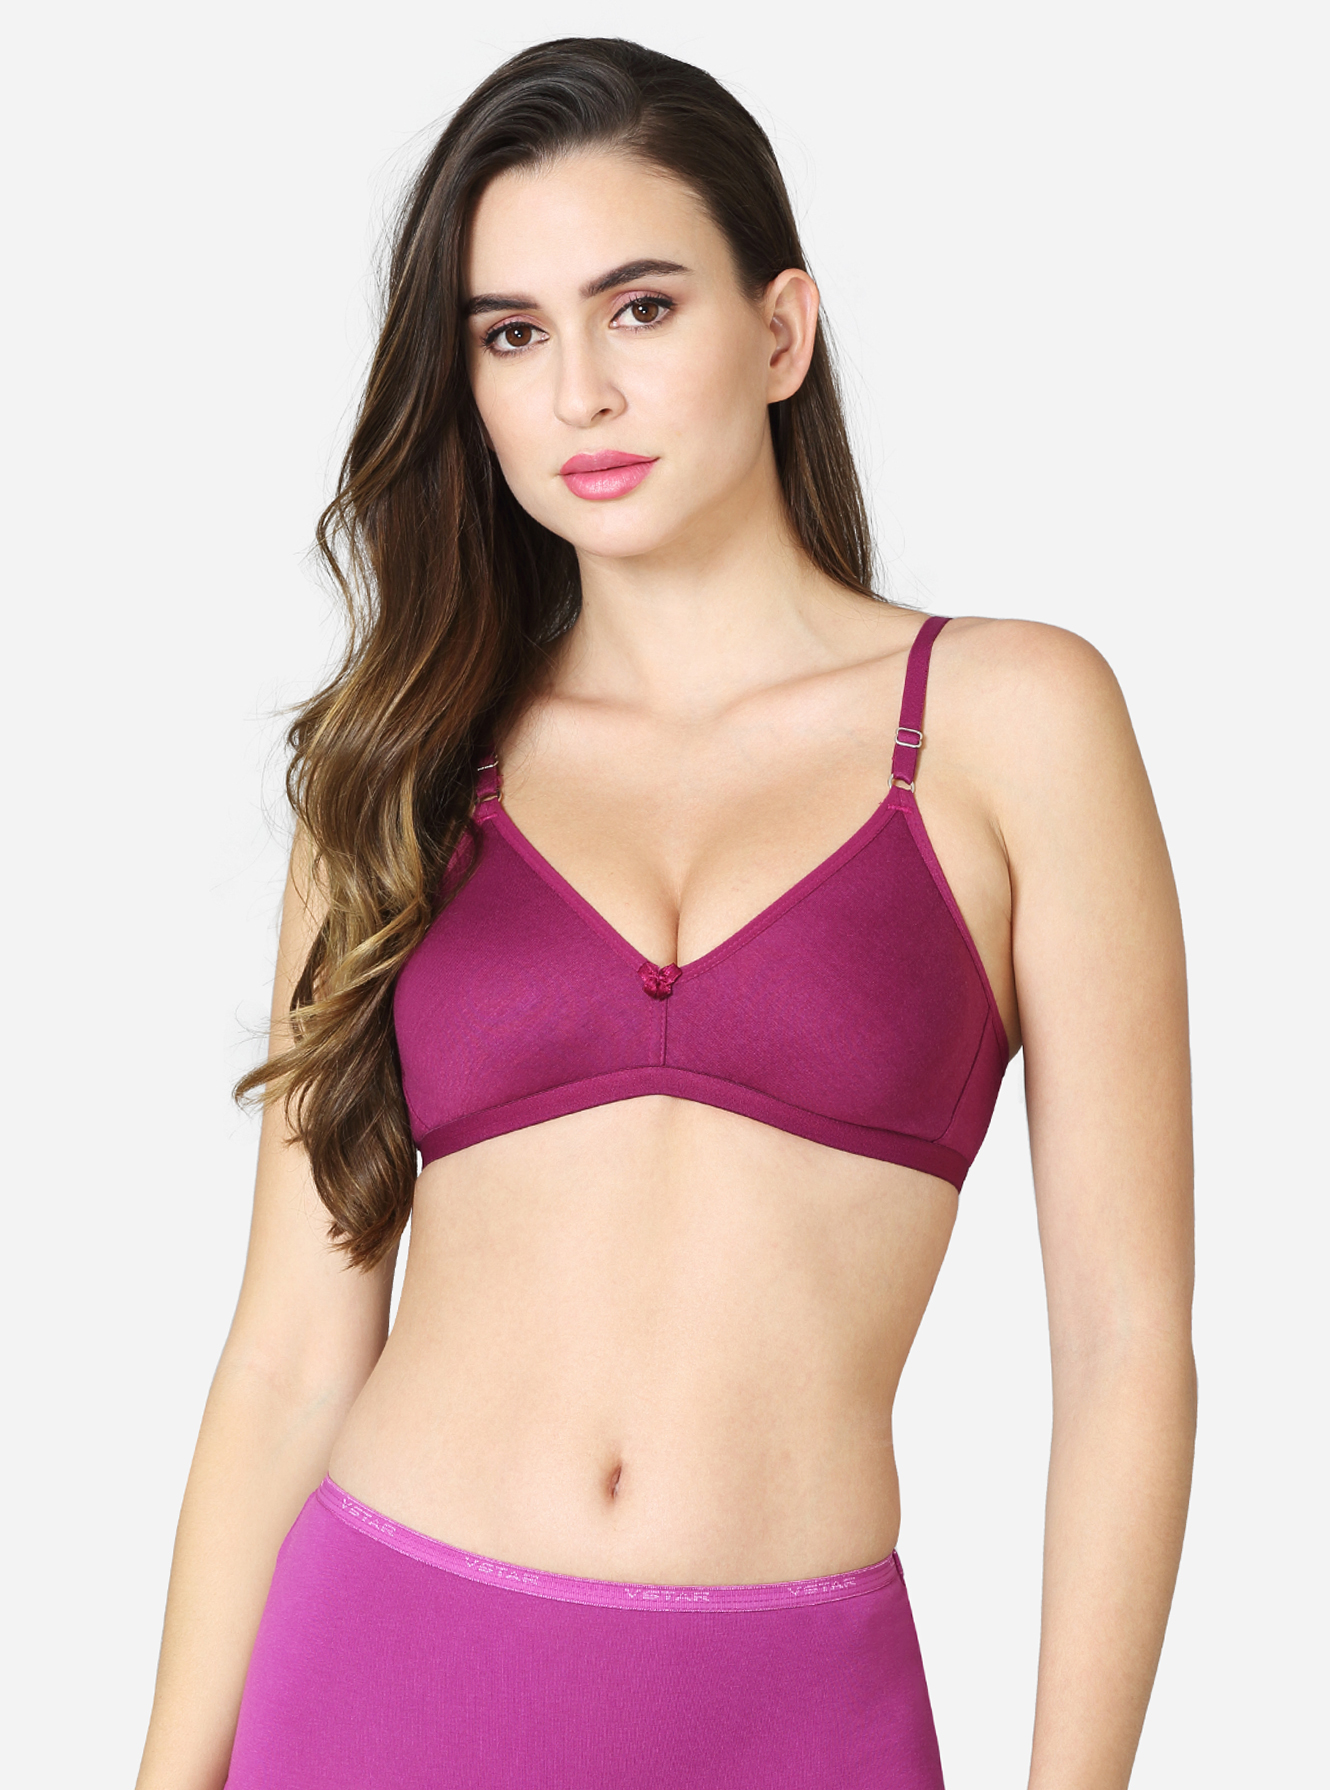 Double layered seamless bra with smooth elastic bottom band